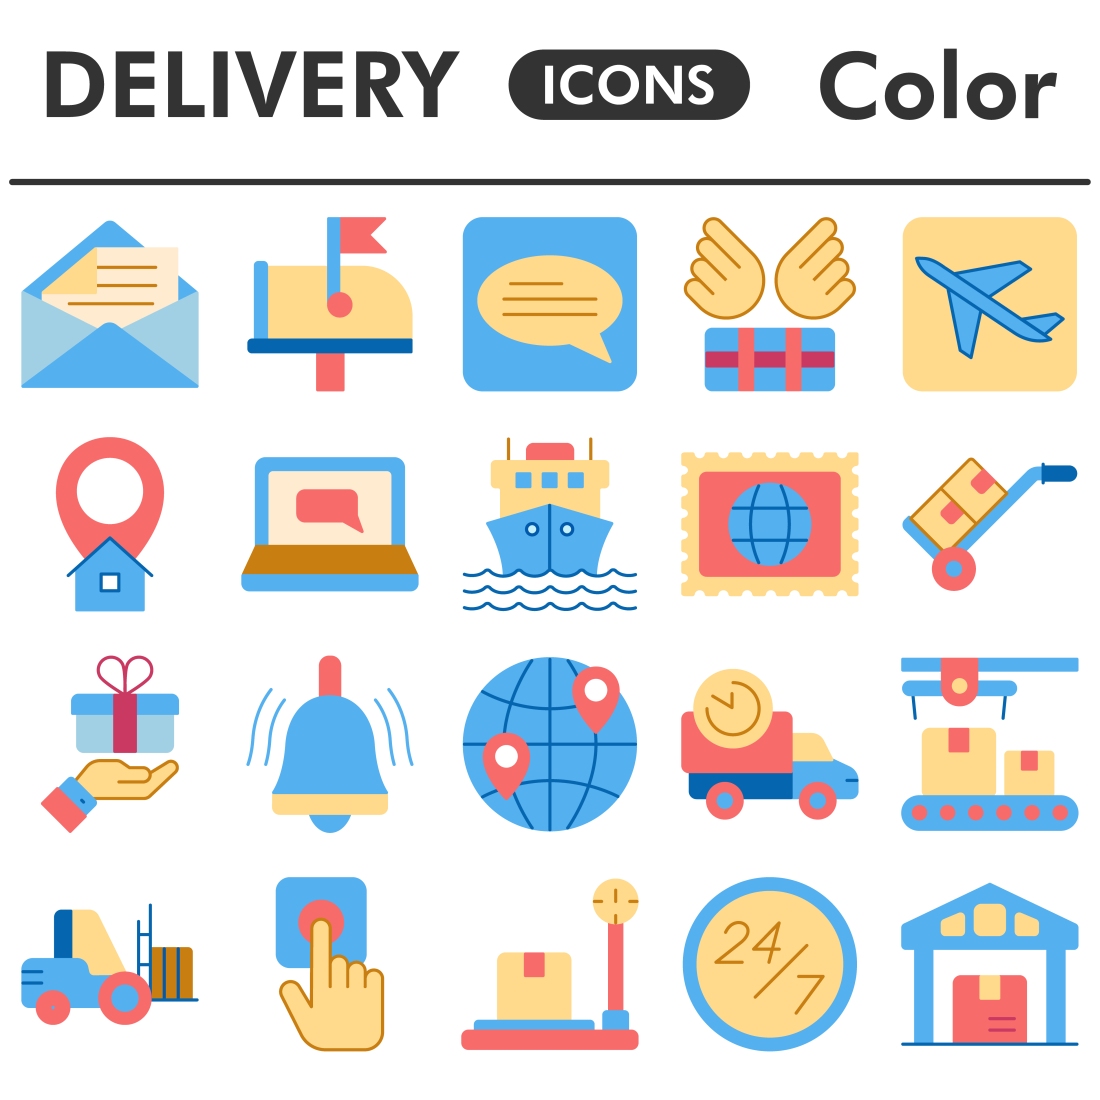 Delivery icons set, color style preview image.